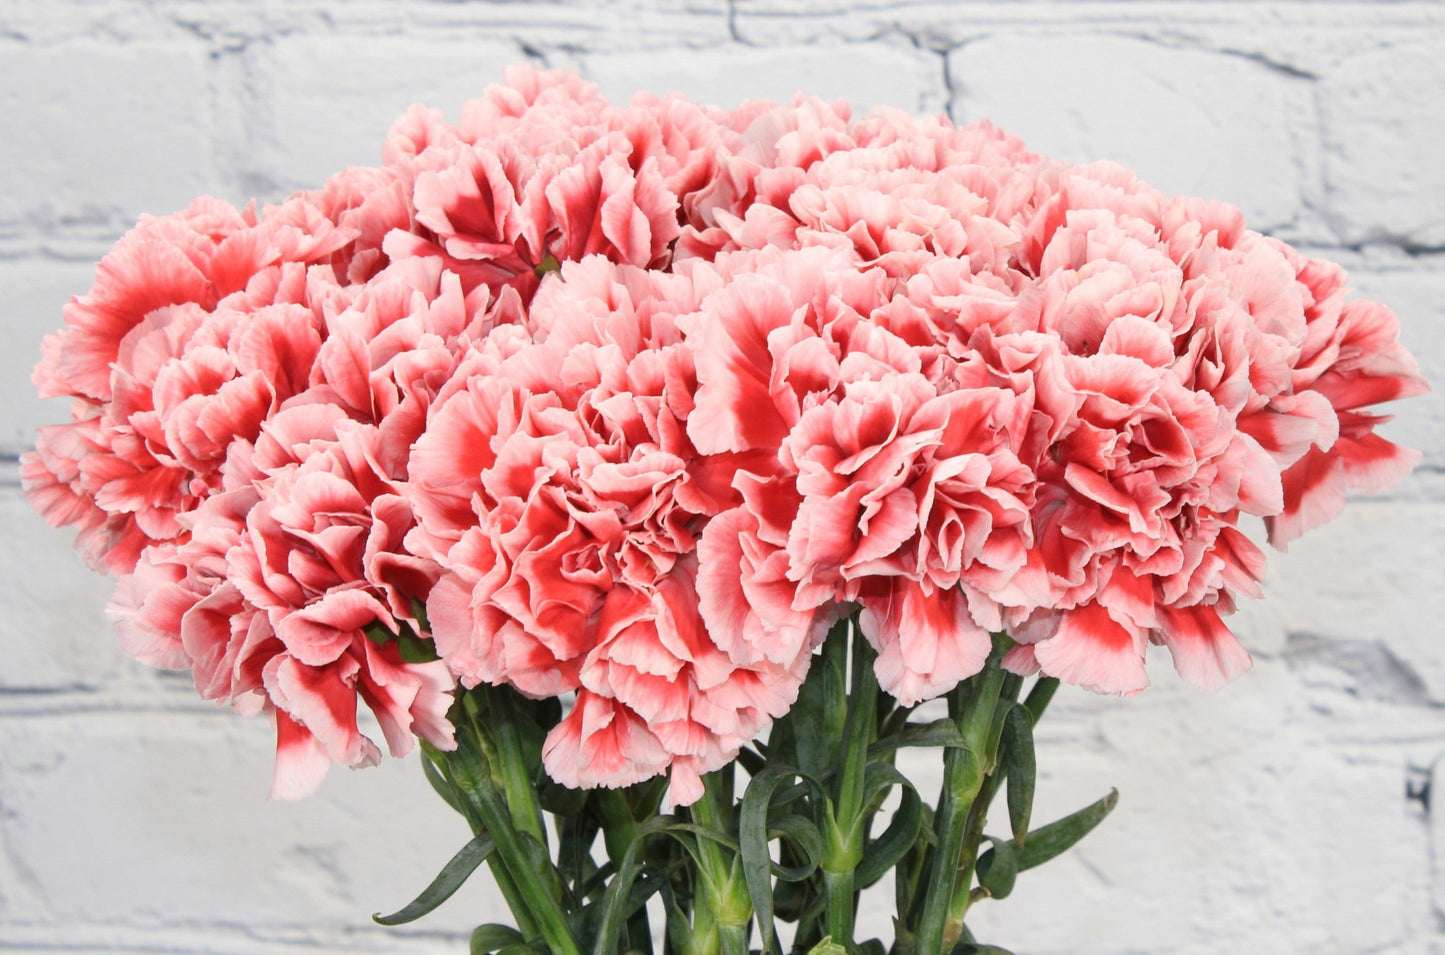 Fresh & Natural Carnations - Red White Bicolor